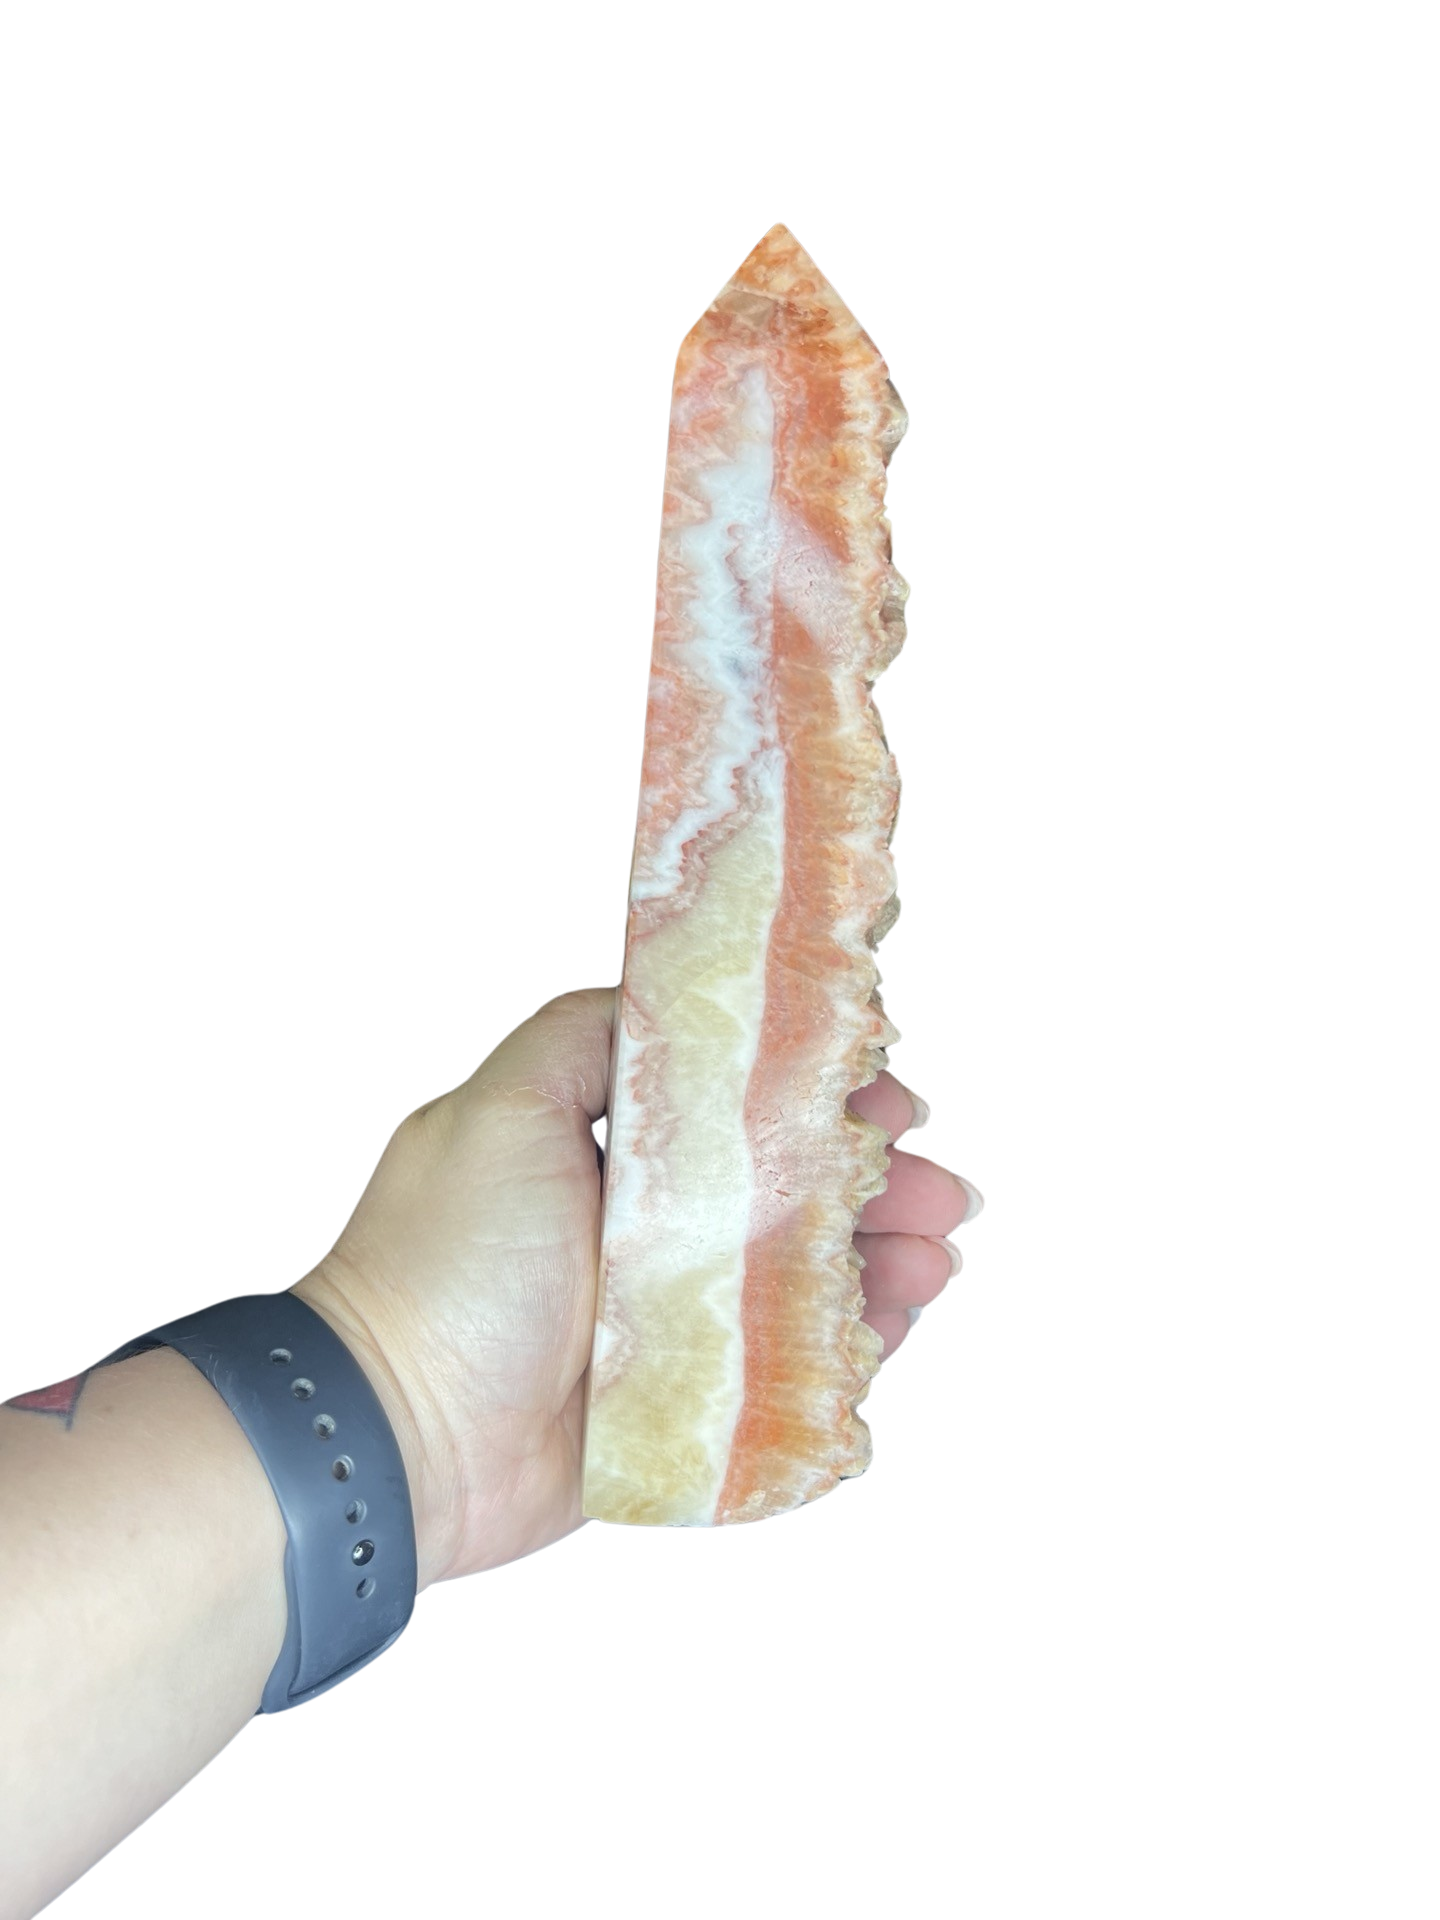 Red Calcite Tower